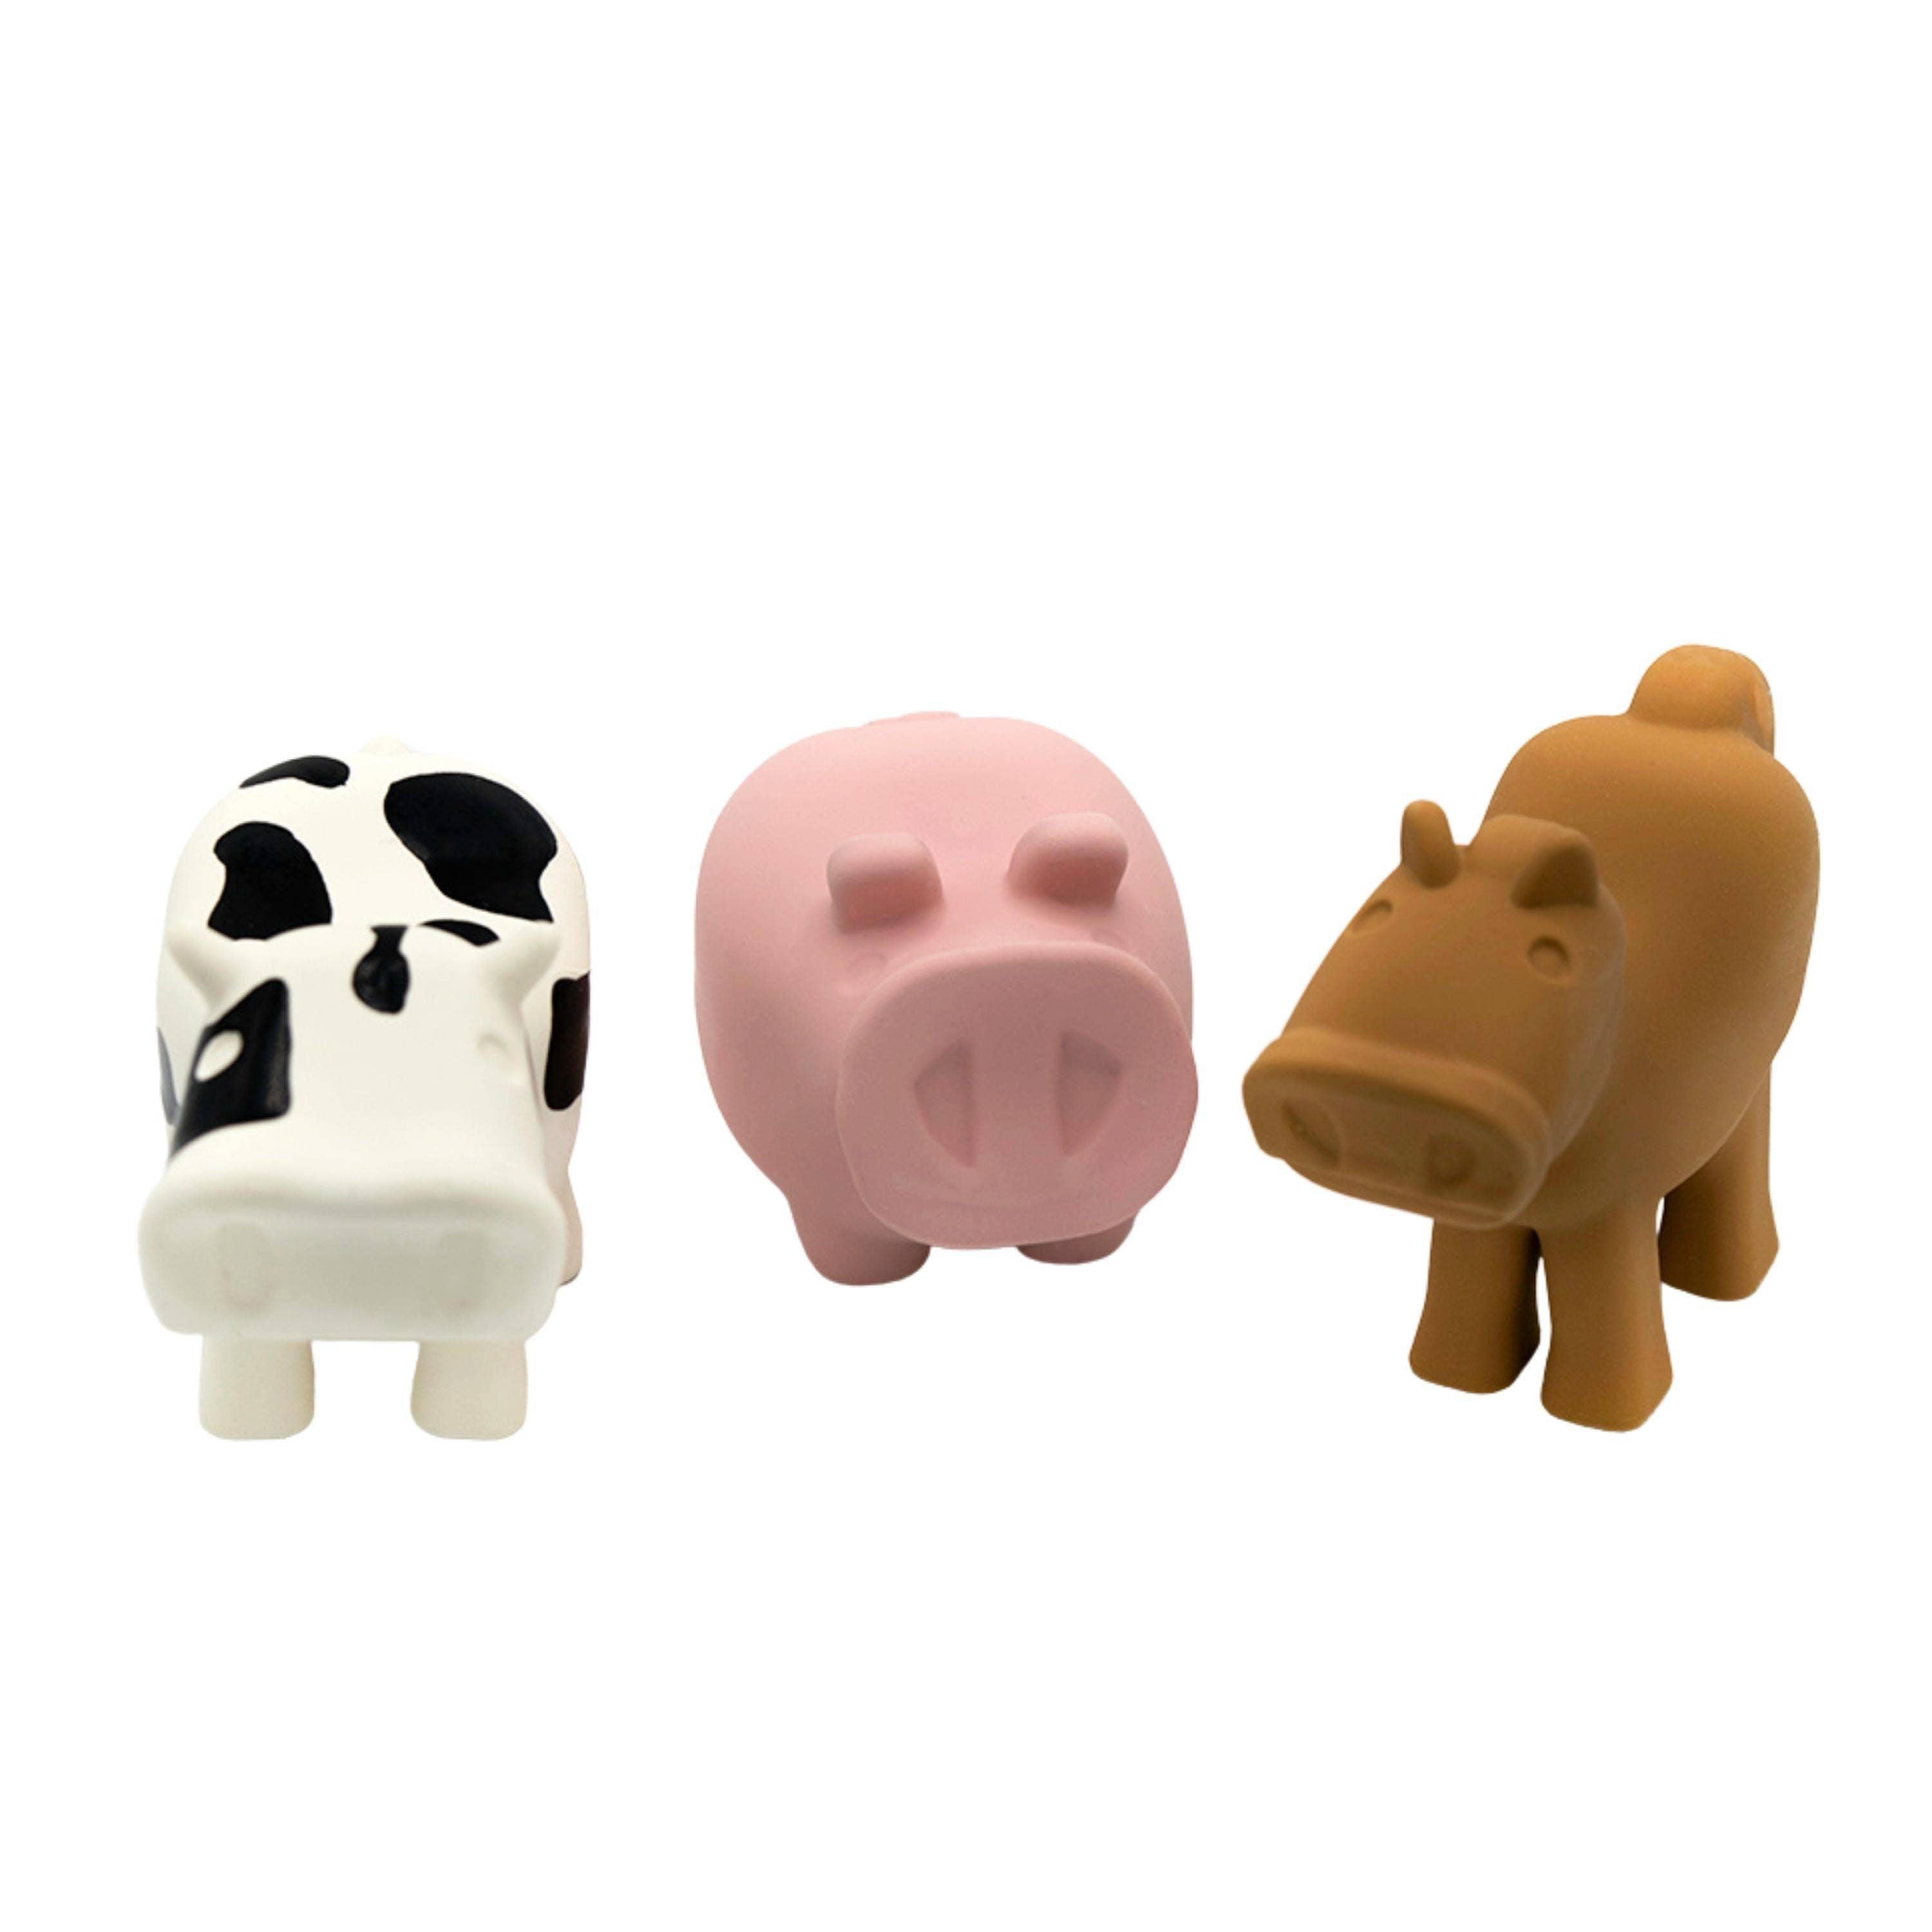 Barnyard Bath Pals - Farm Themed Set of 3 - Why and Whale